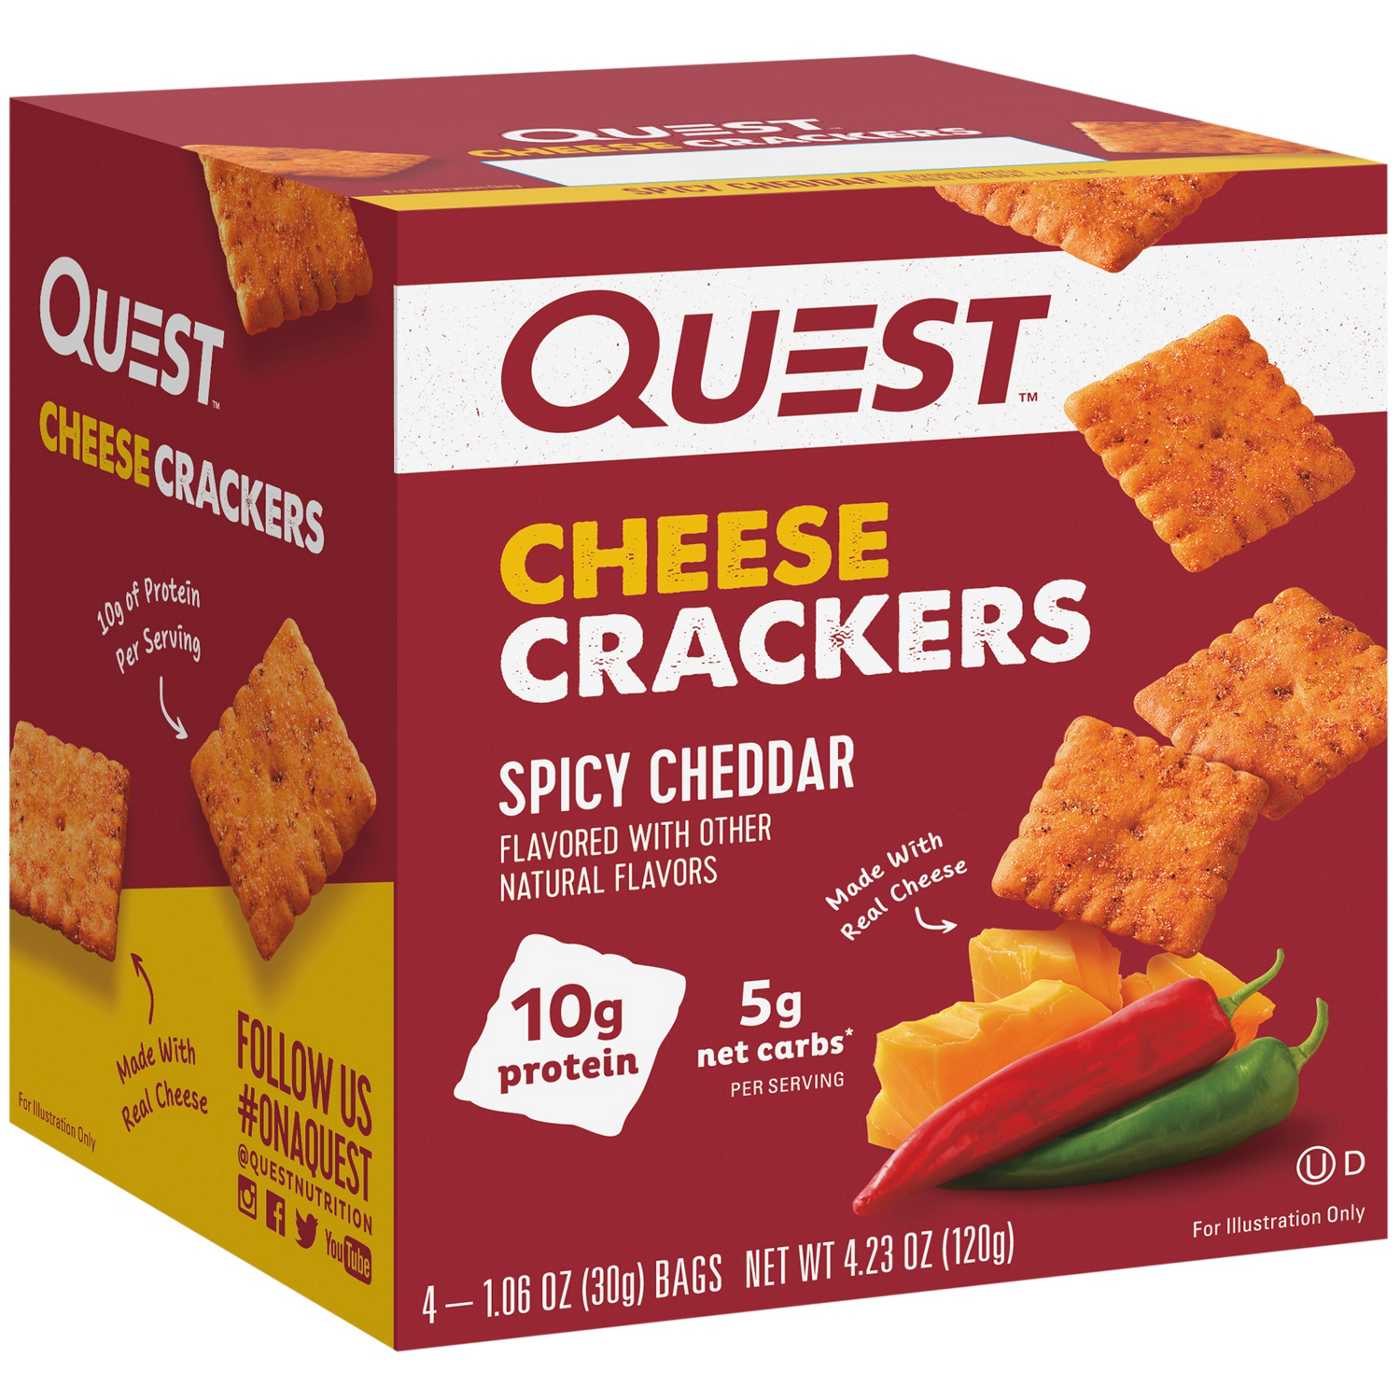 Quest Cheese Crackers - Spicy Cheddar; image 2 of 3